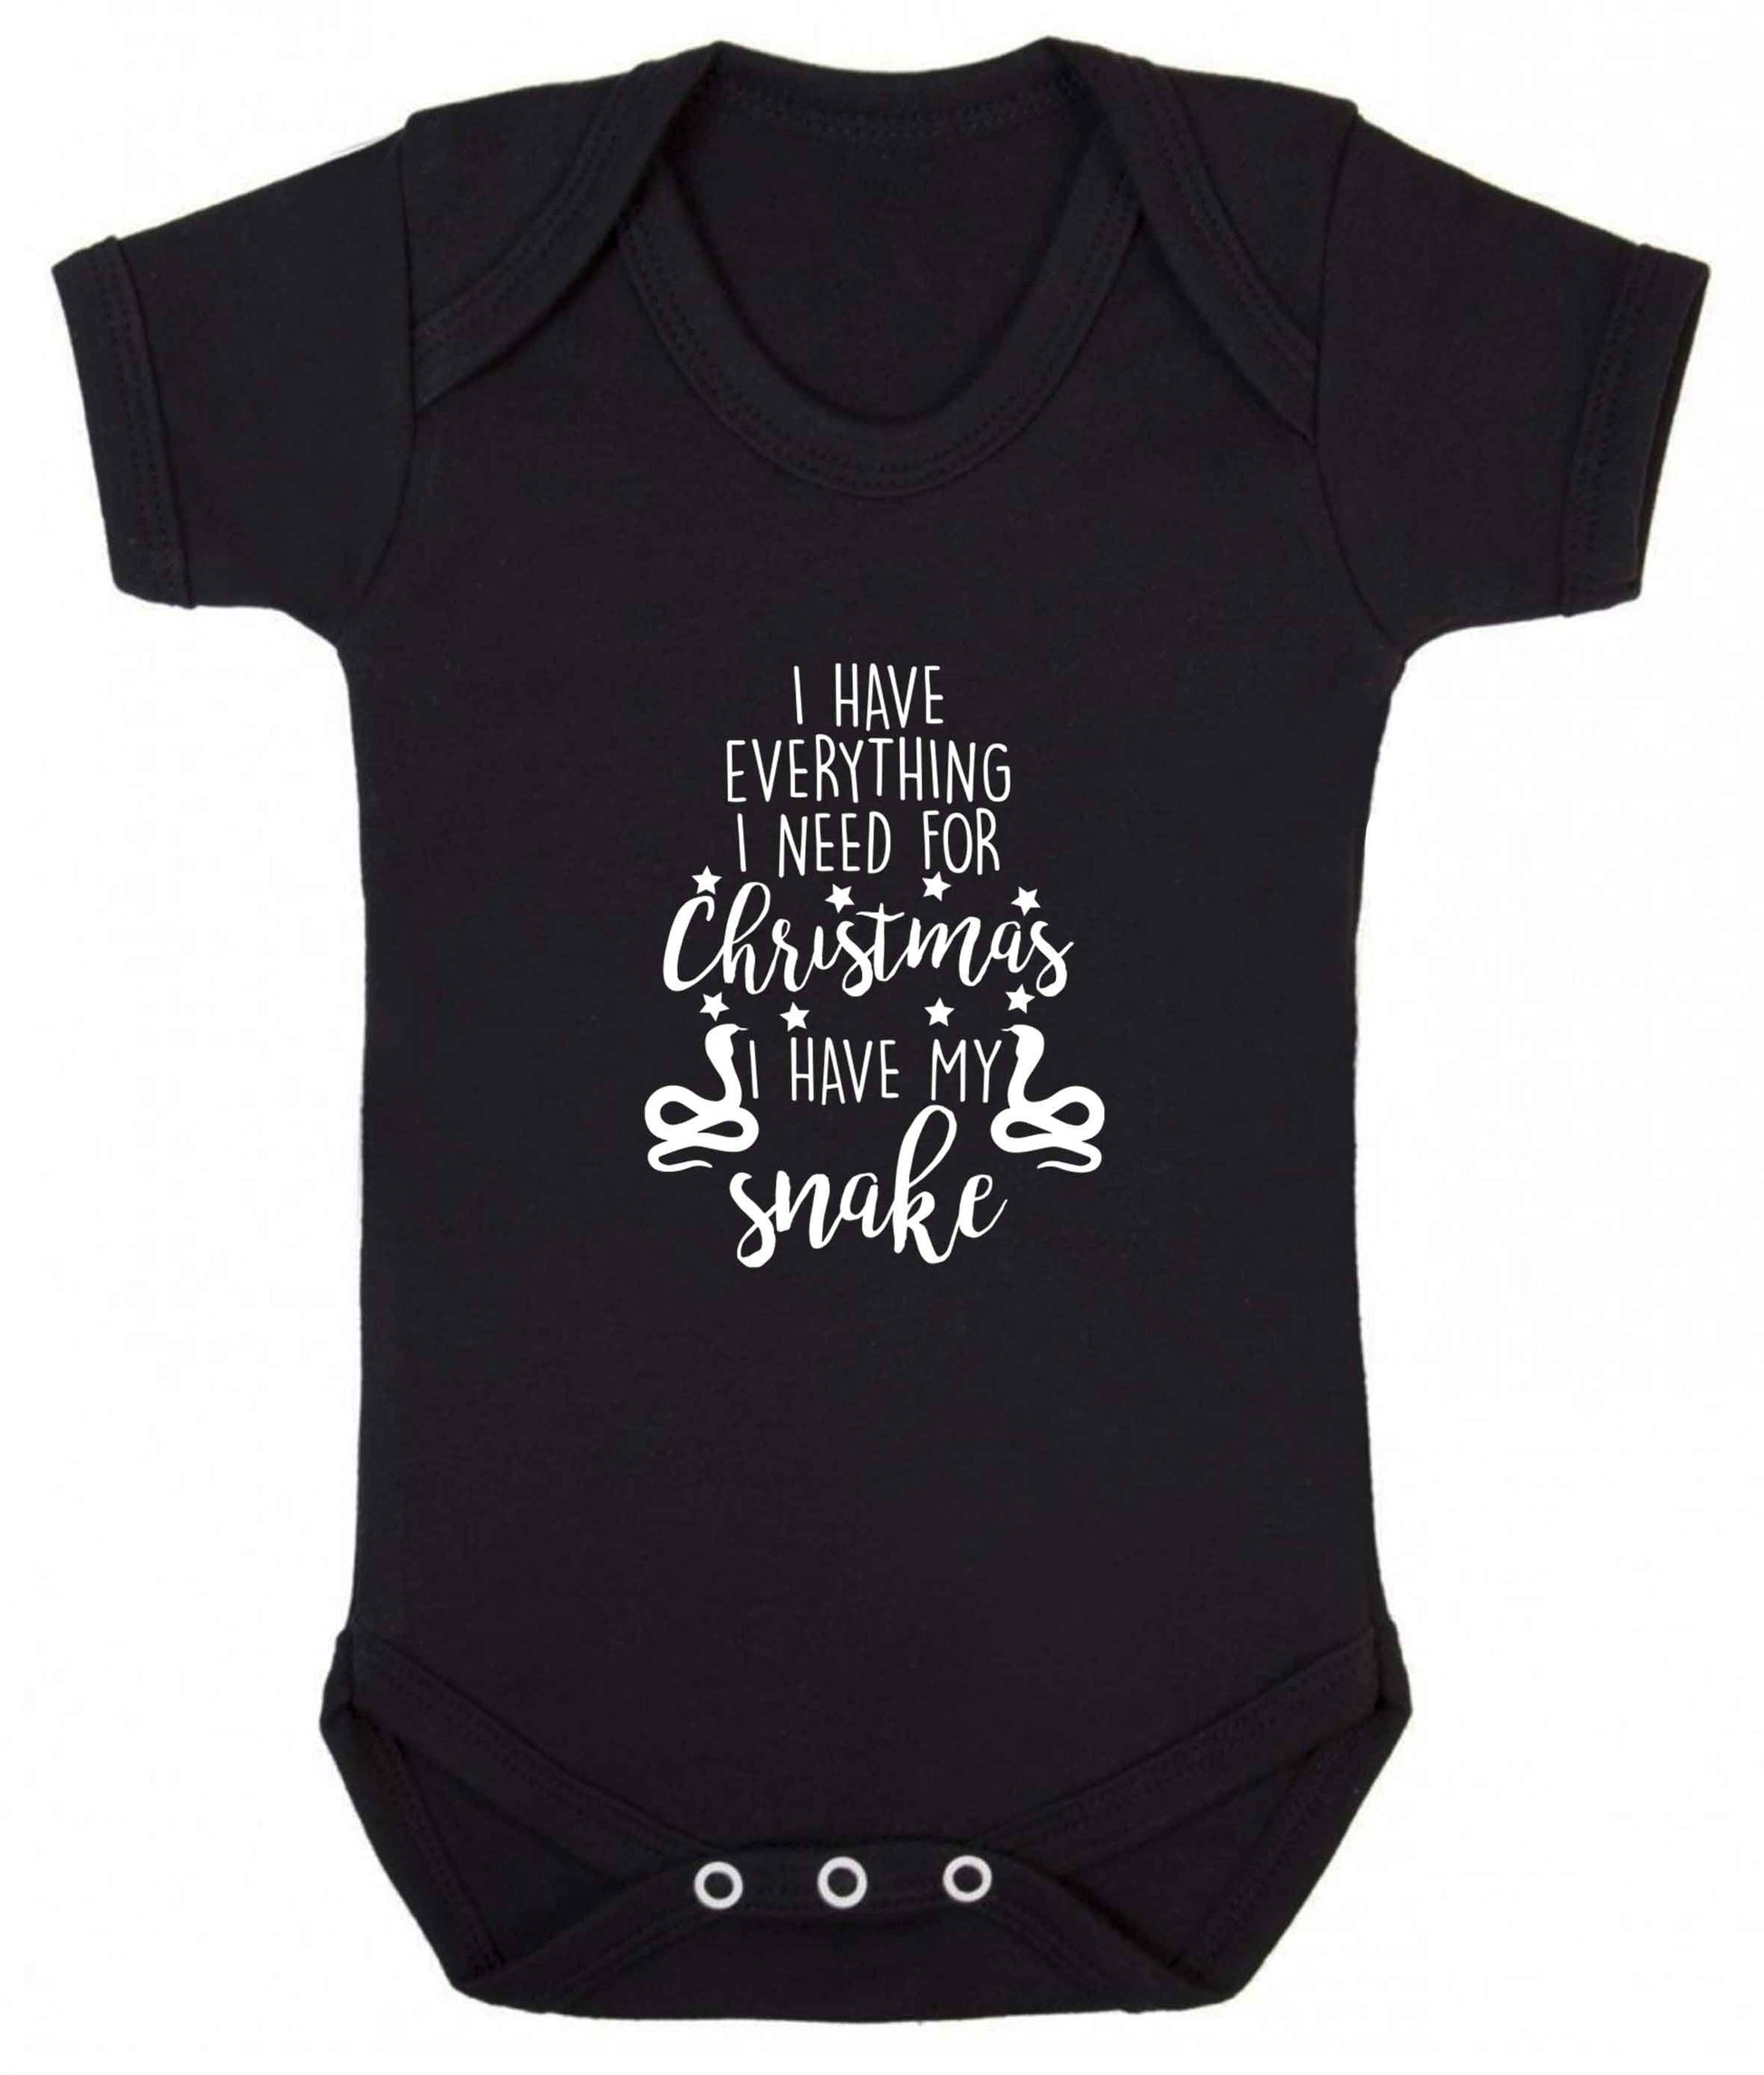 I have everything I need for Christmas I have my snake baby vest black 18-24 months